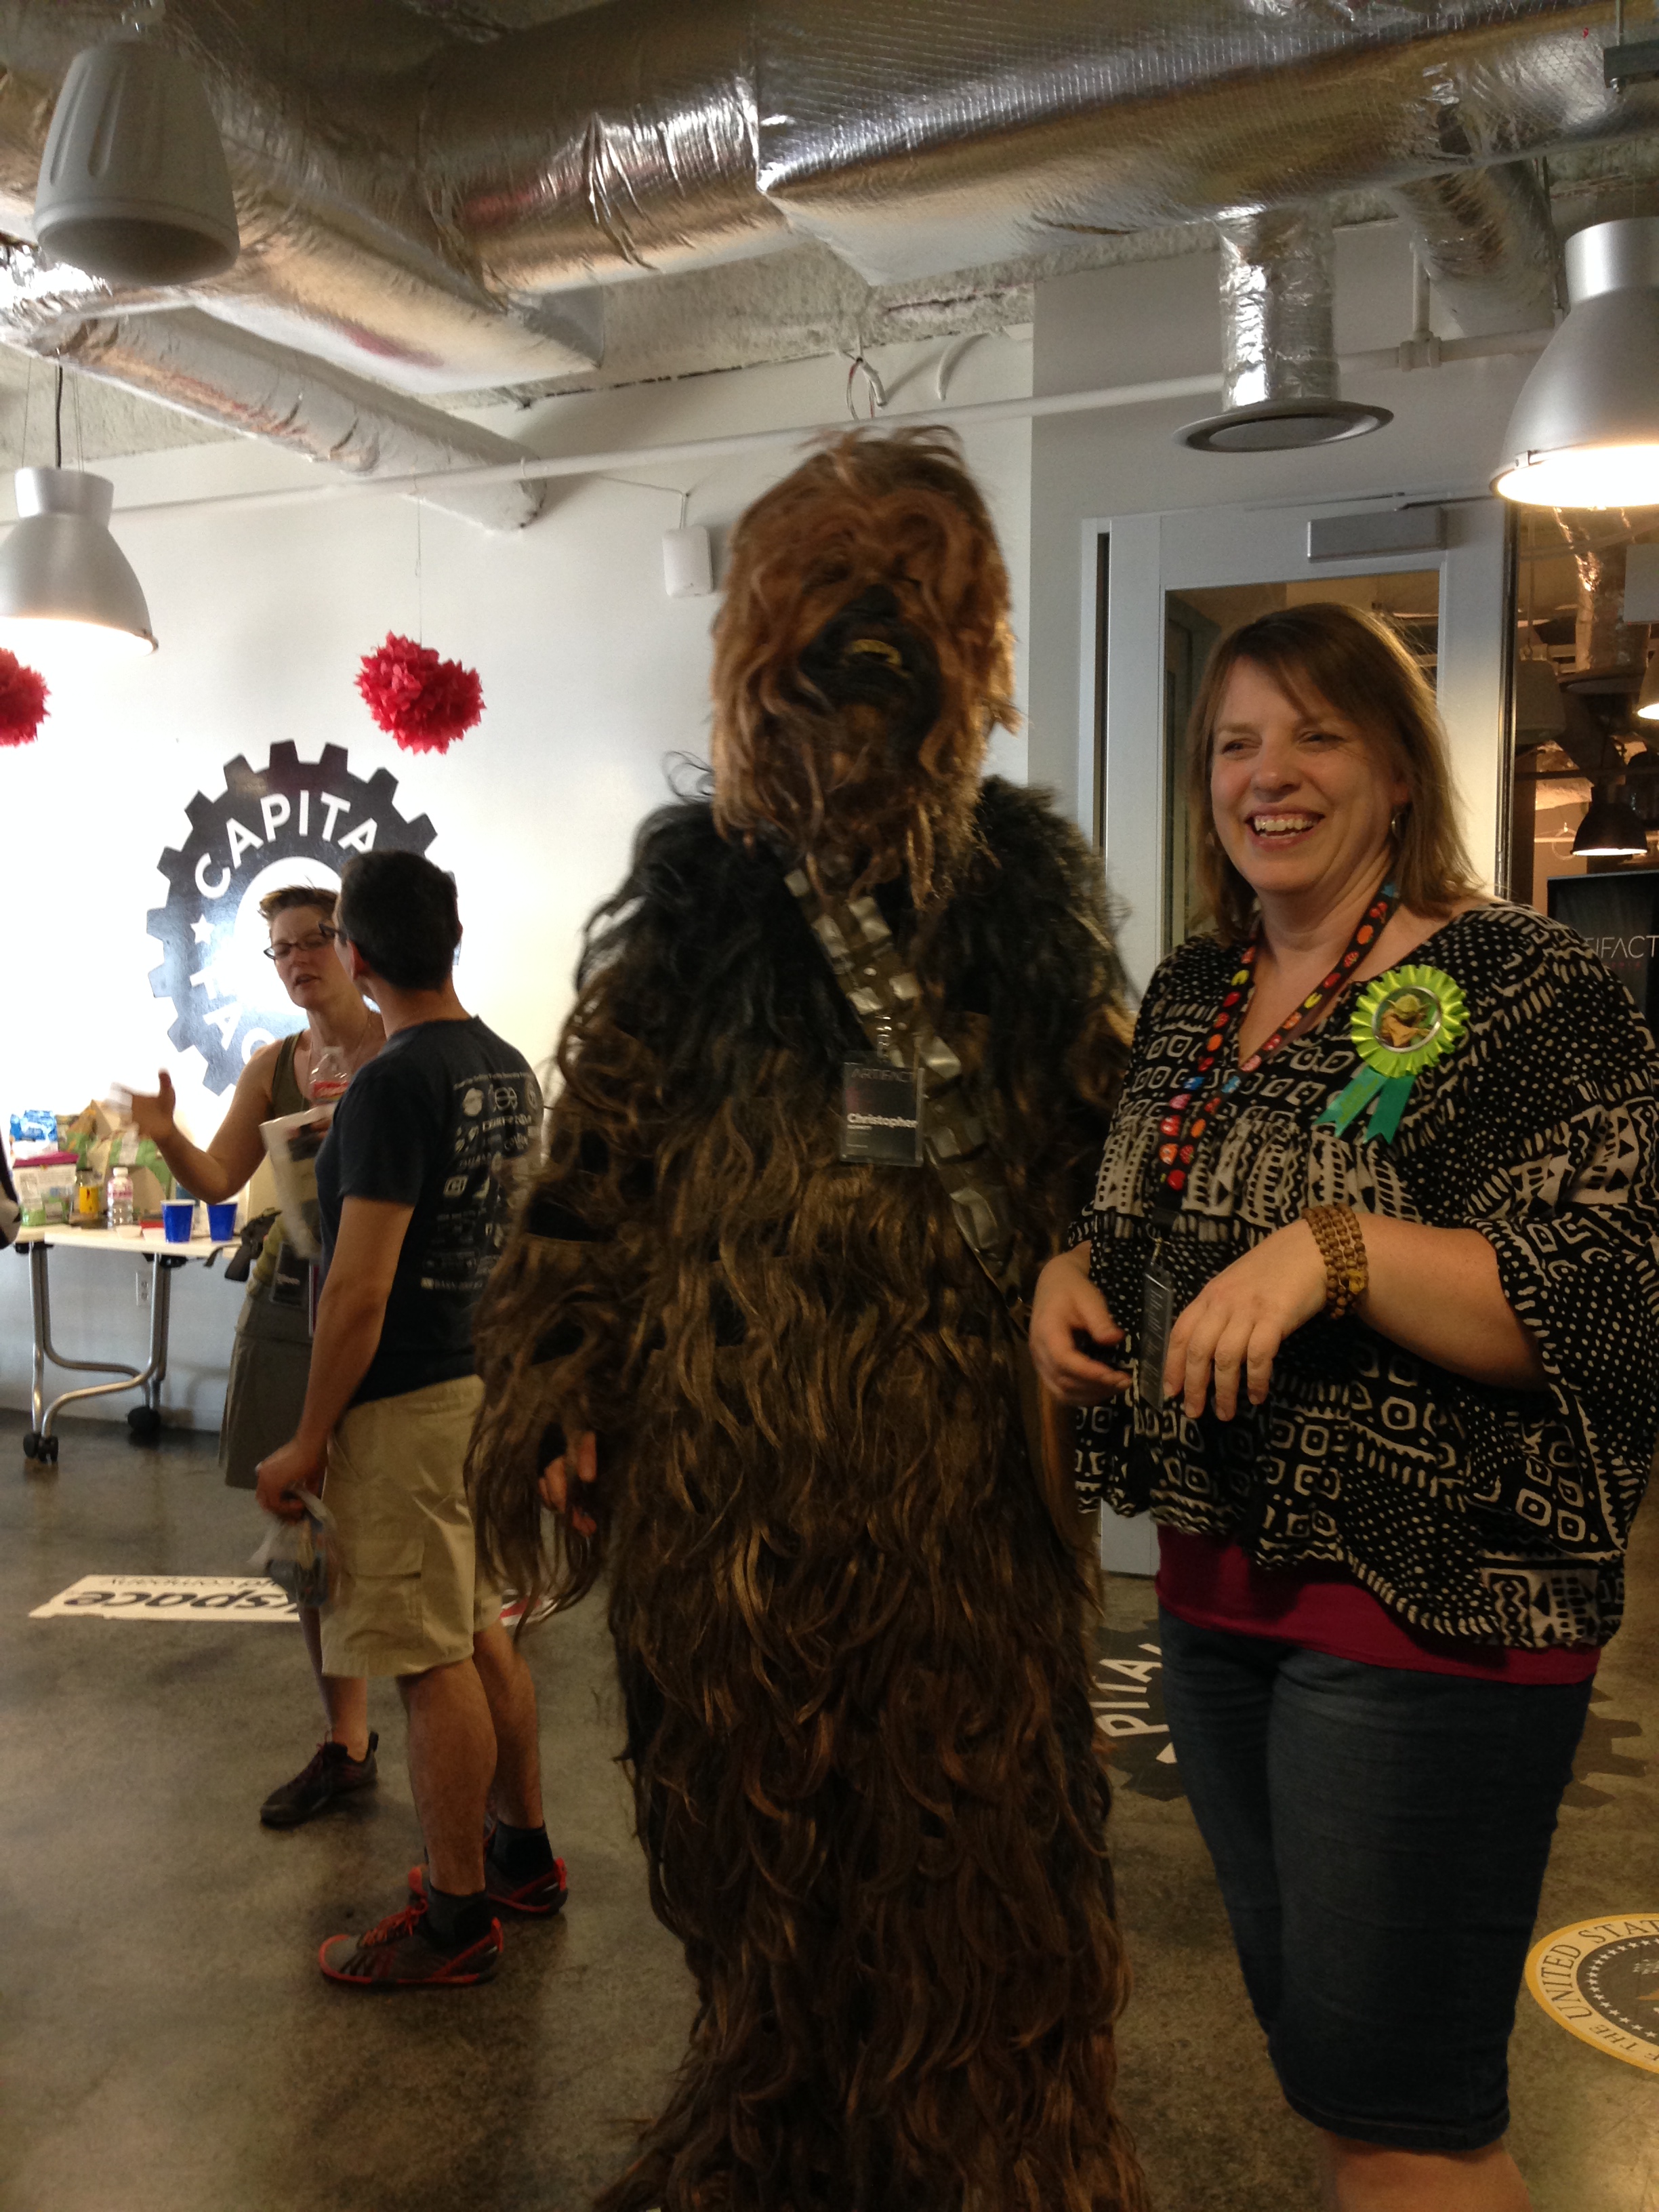 Christopher dressed as Chewbacca at an event with Ari in Austin.